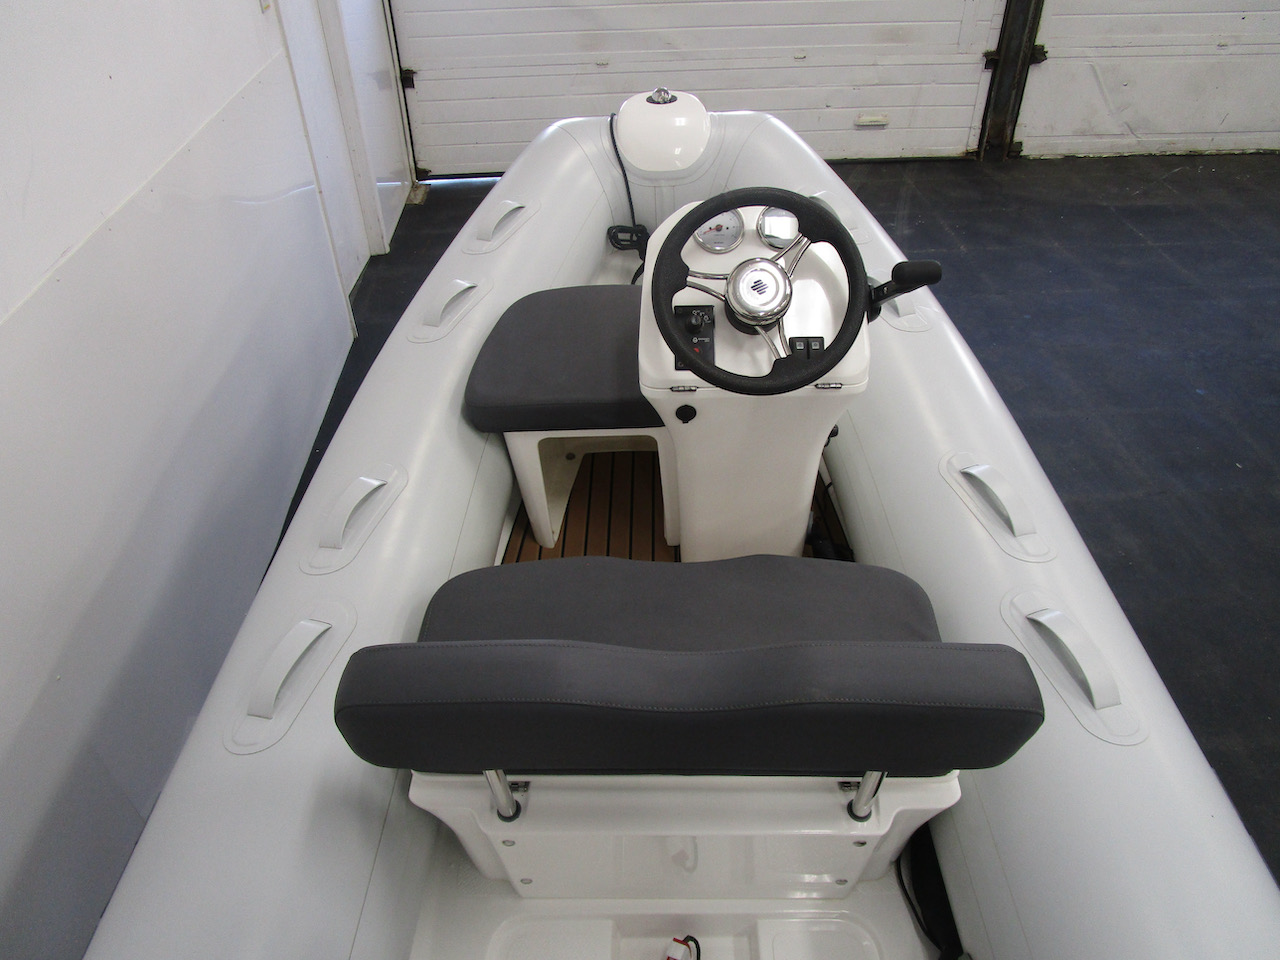 GRAND S330 RIB helm seat, console and side seat